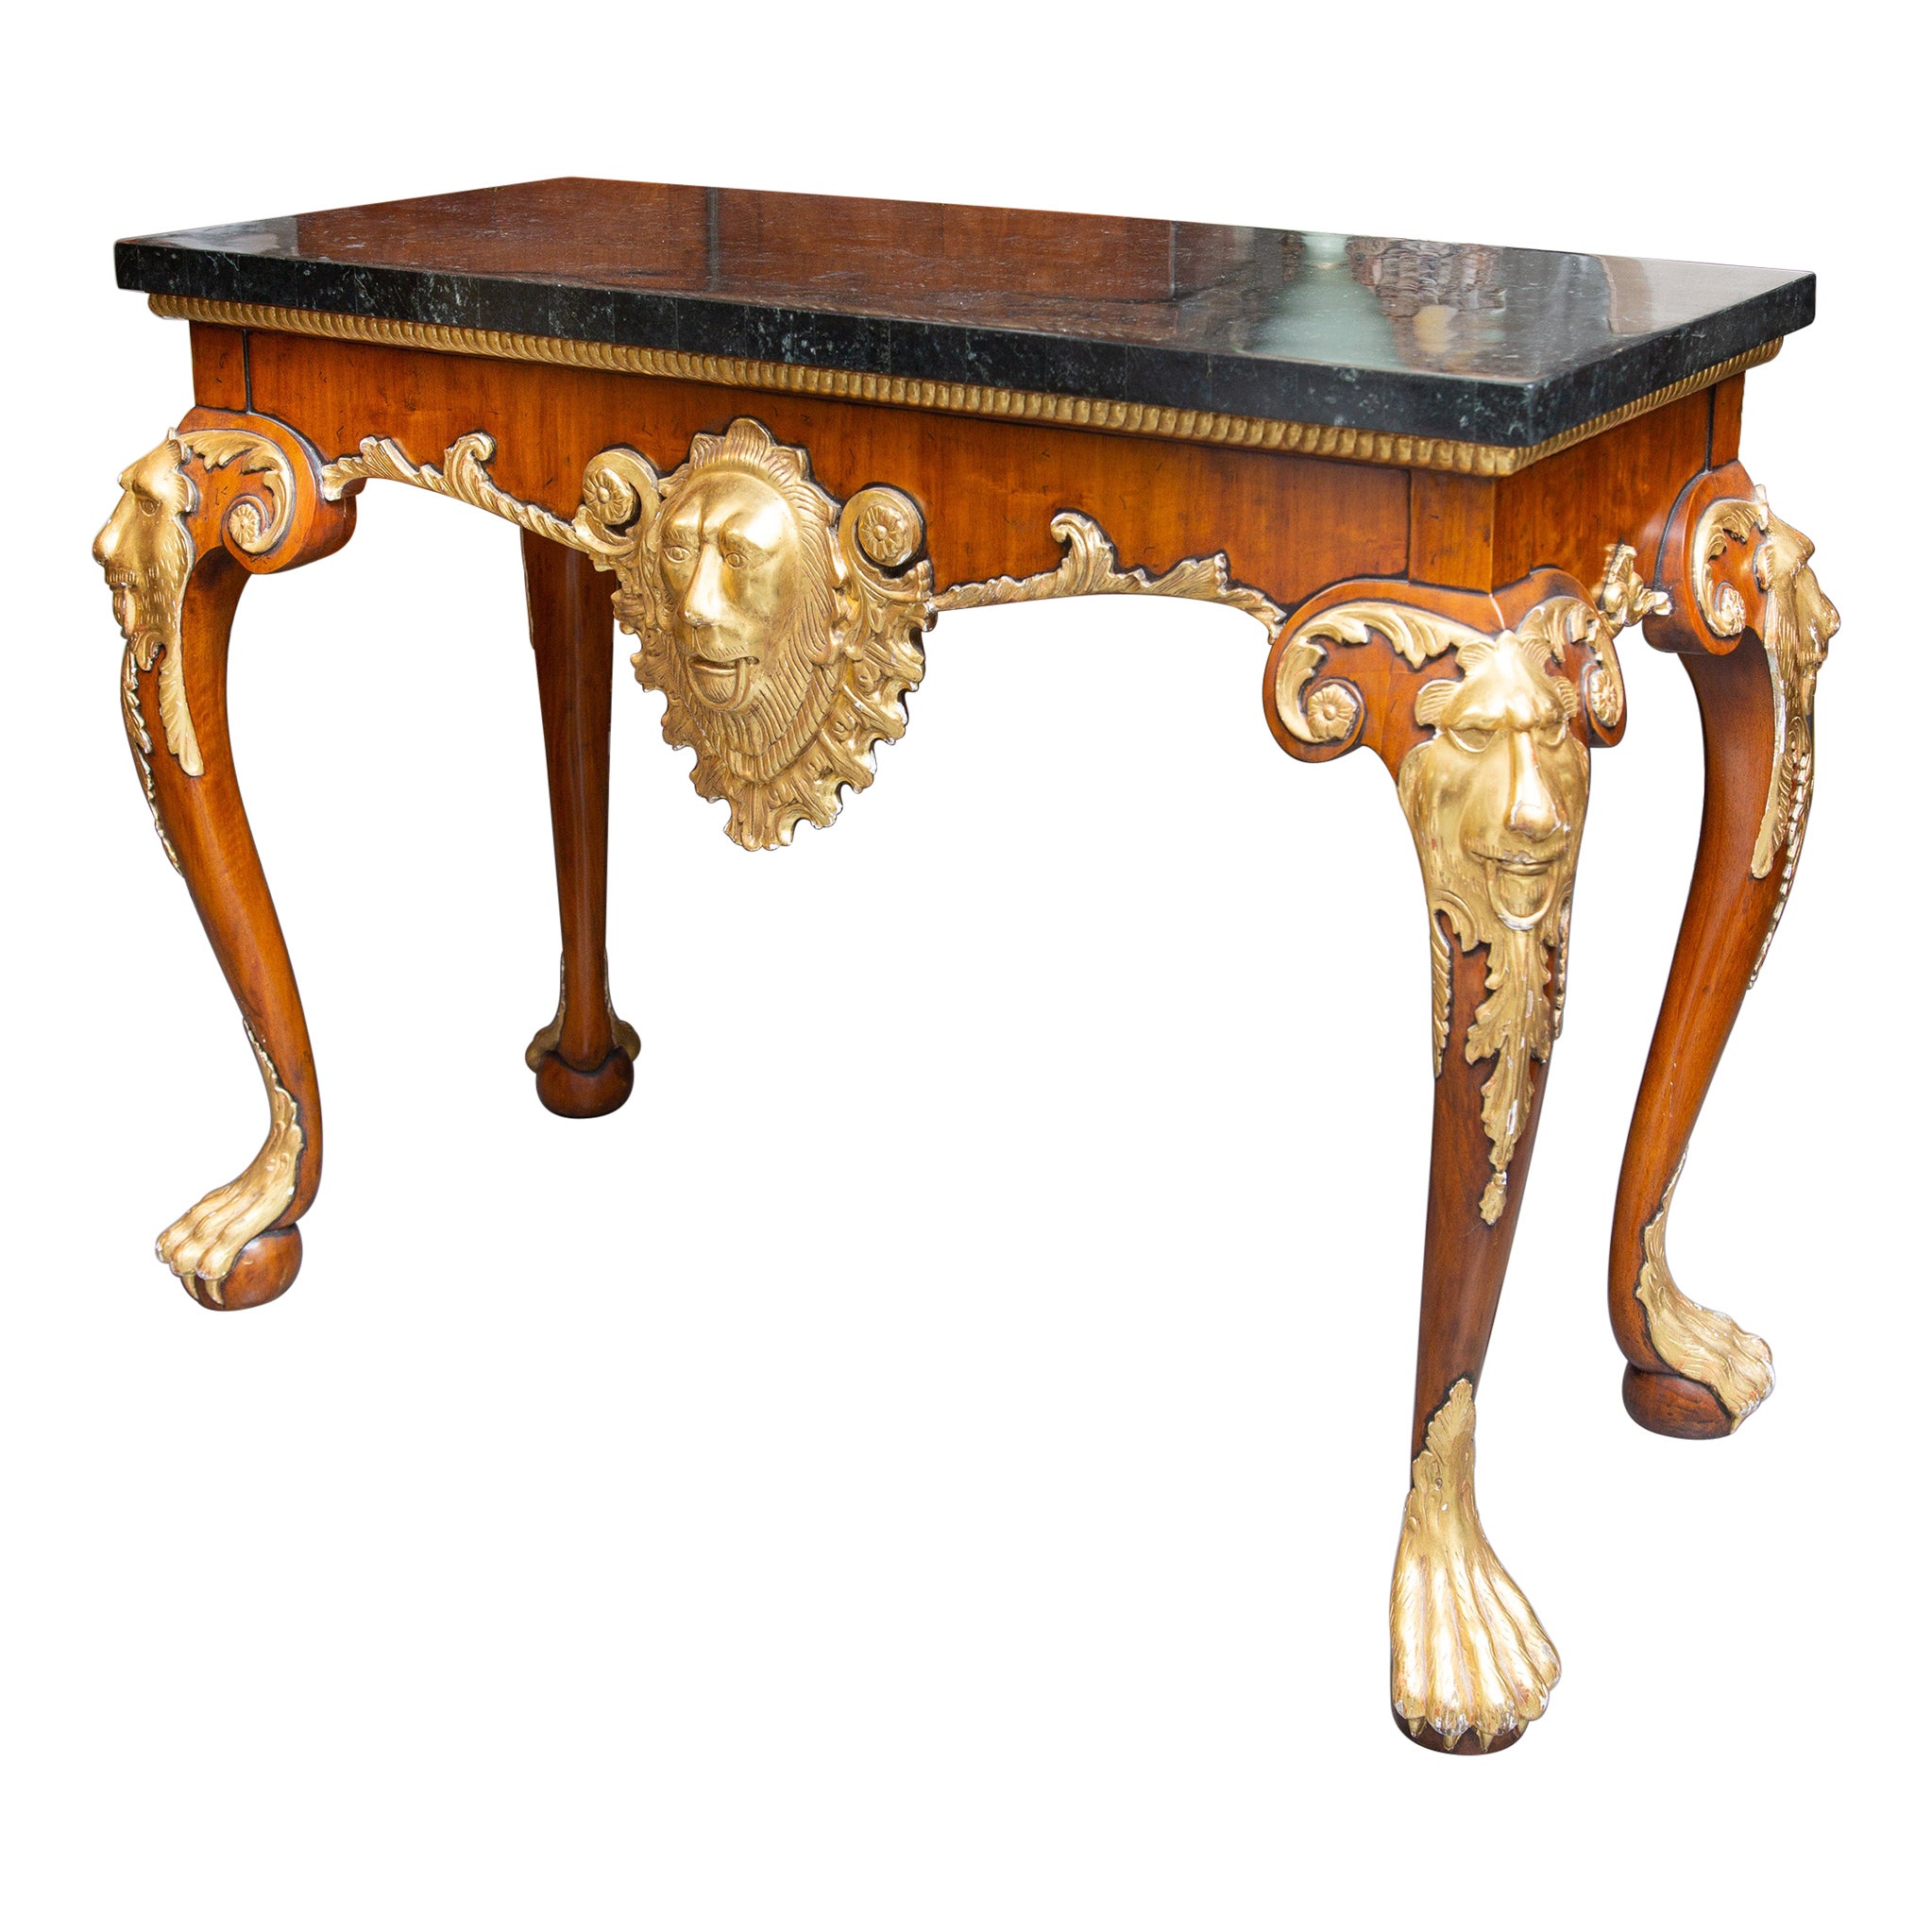 Regency Style Console Table with Gilt Decorations